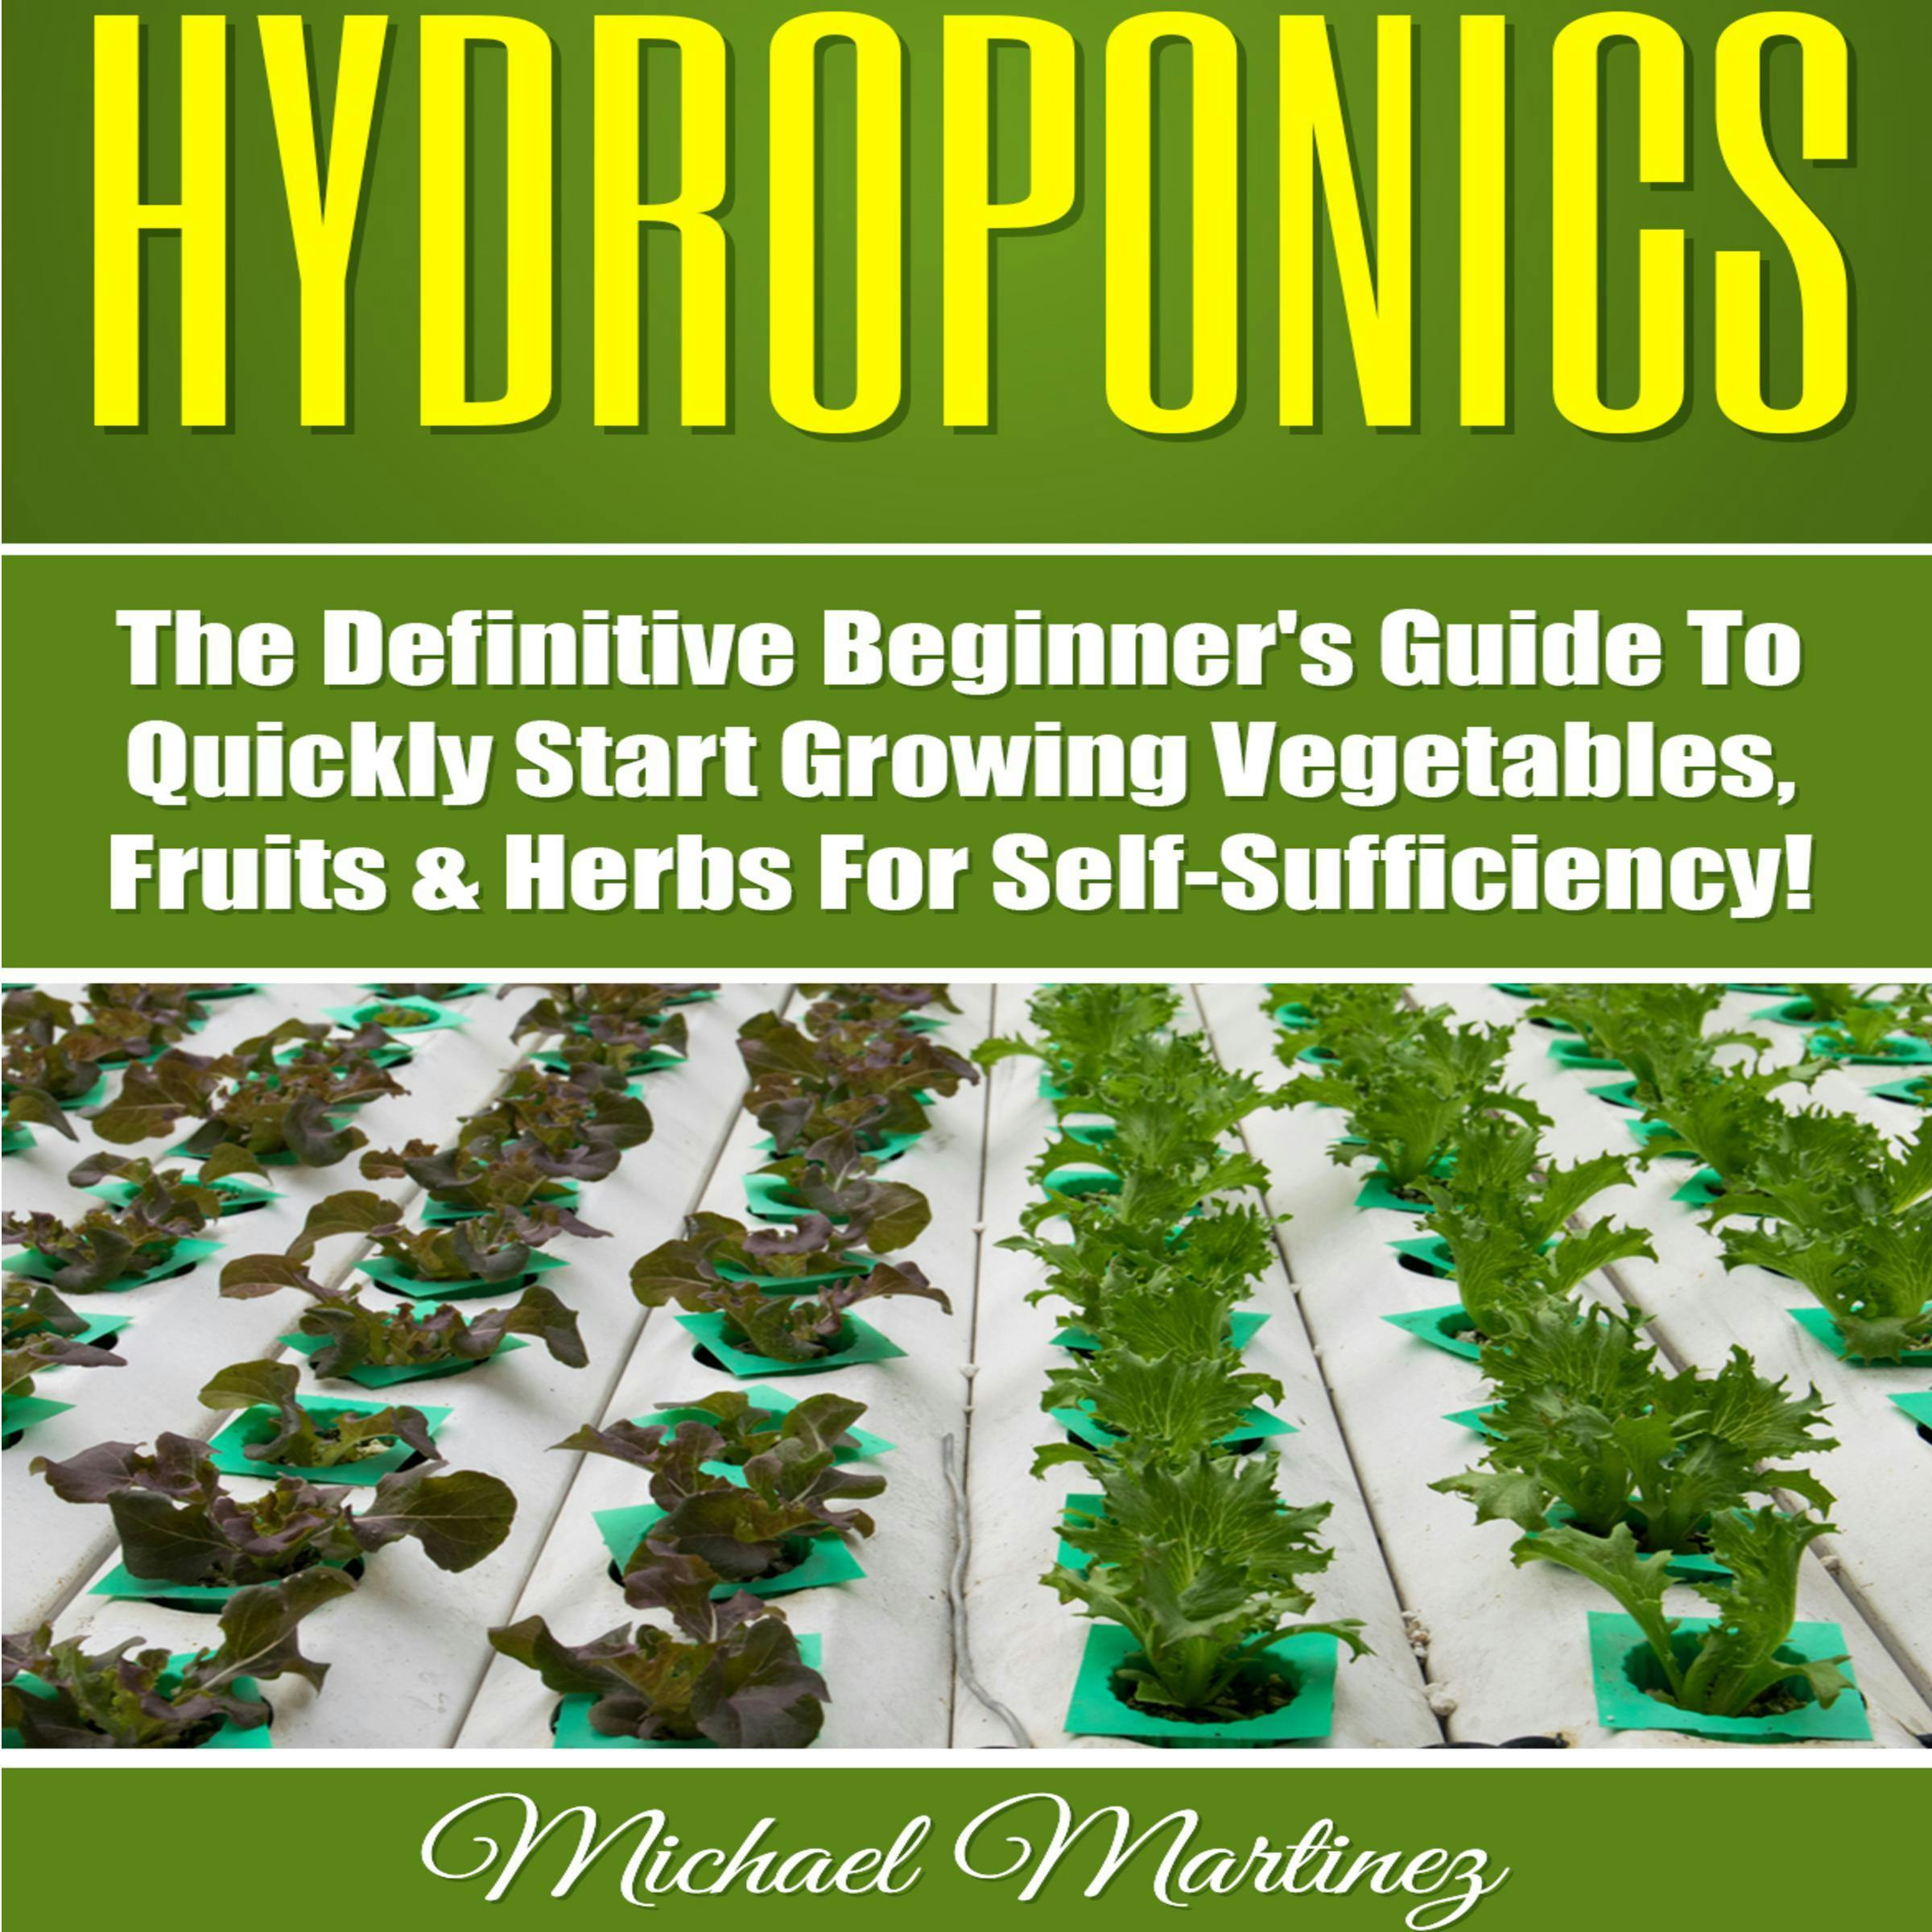 Hydroponics: The Definitive Beginner’s Guide to Quickly Start Growing Vegetables, Fruits, & Herbs for Self-Sufficiency! (Gardening, Organic Gardening, Homesteading, Horticulture, Aquaculture) - undefined